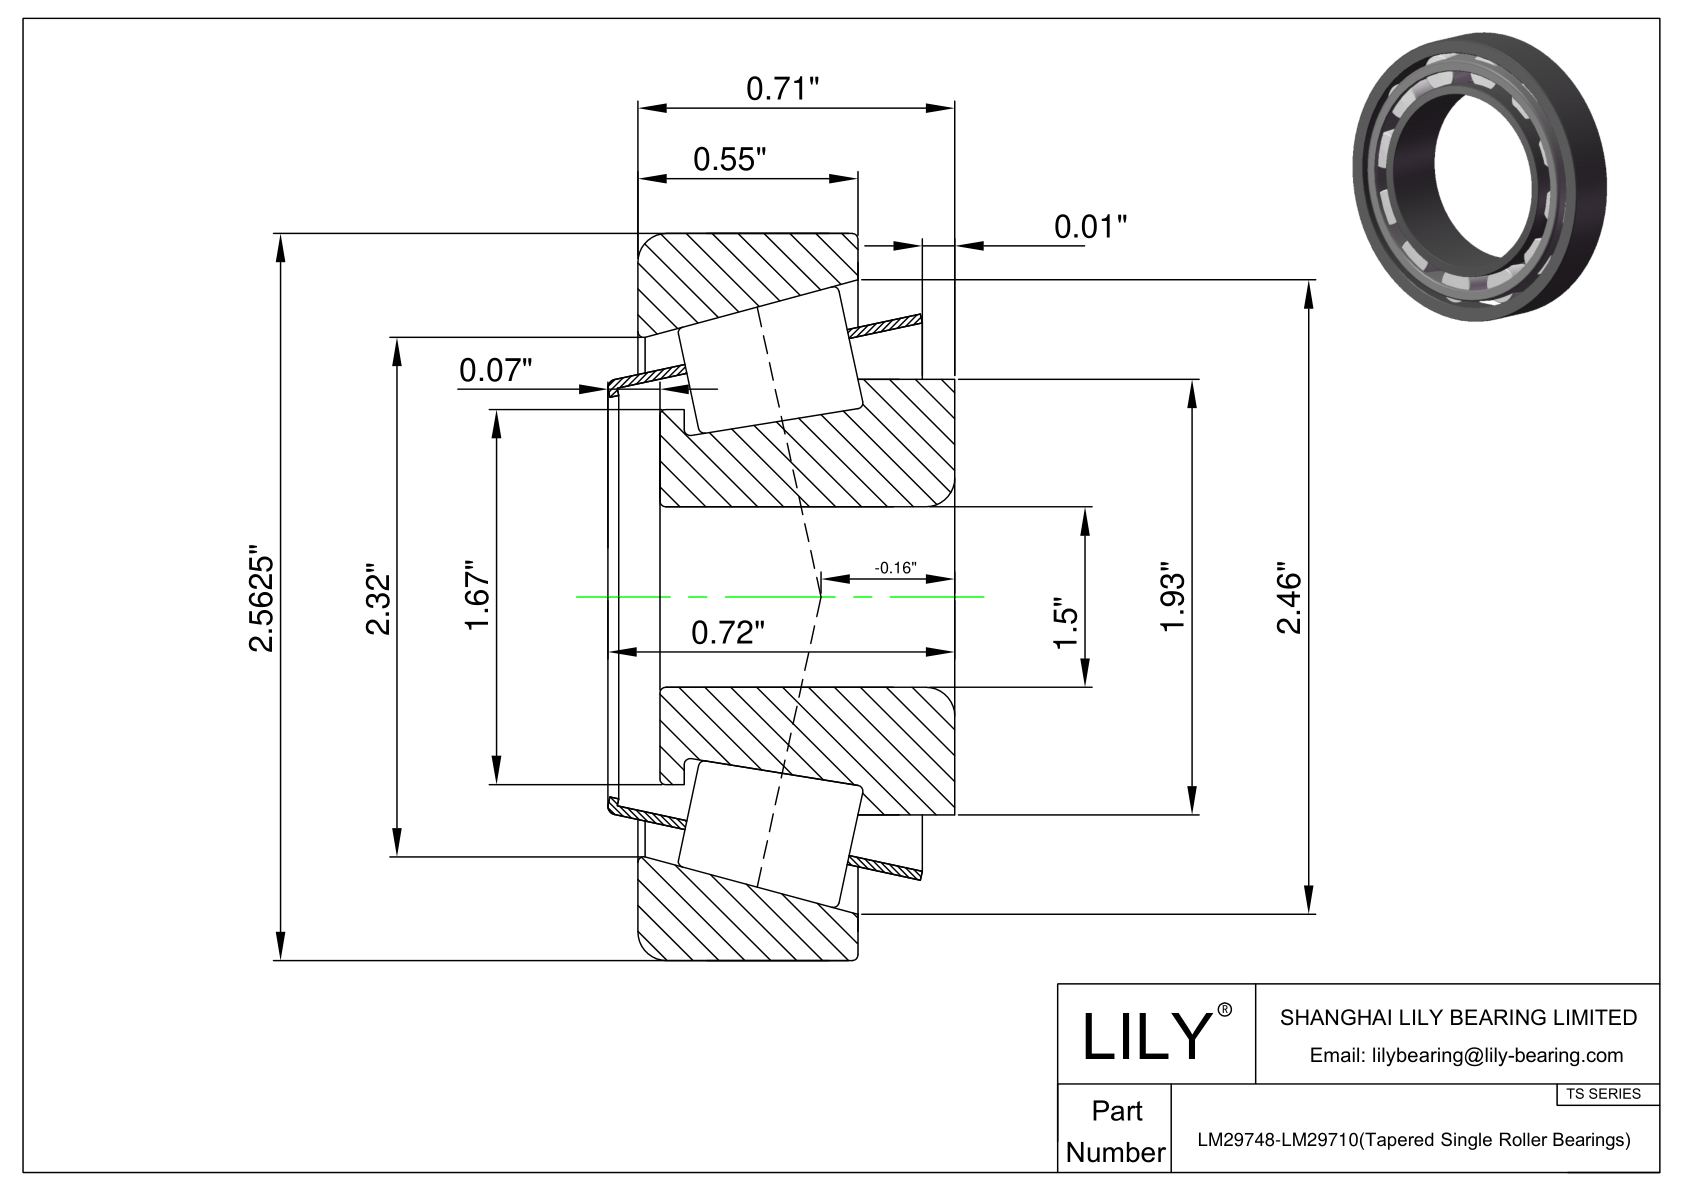 LM29748-LM29710 TS (Tapered Single Roller Bearings) (Imperial) cad drawing